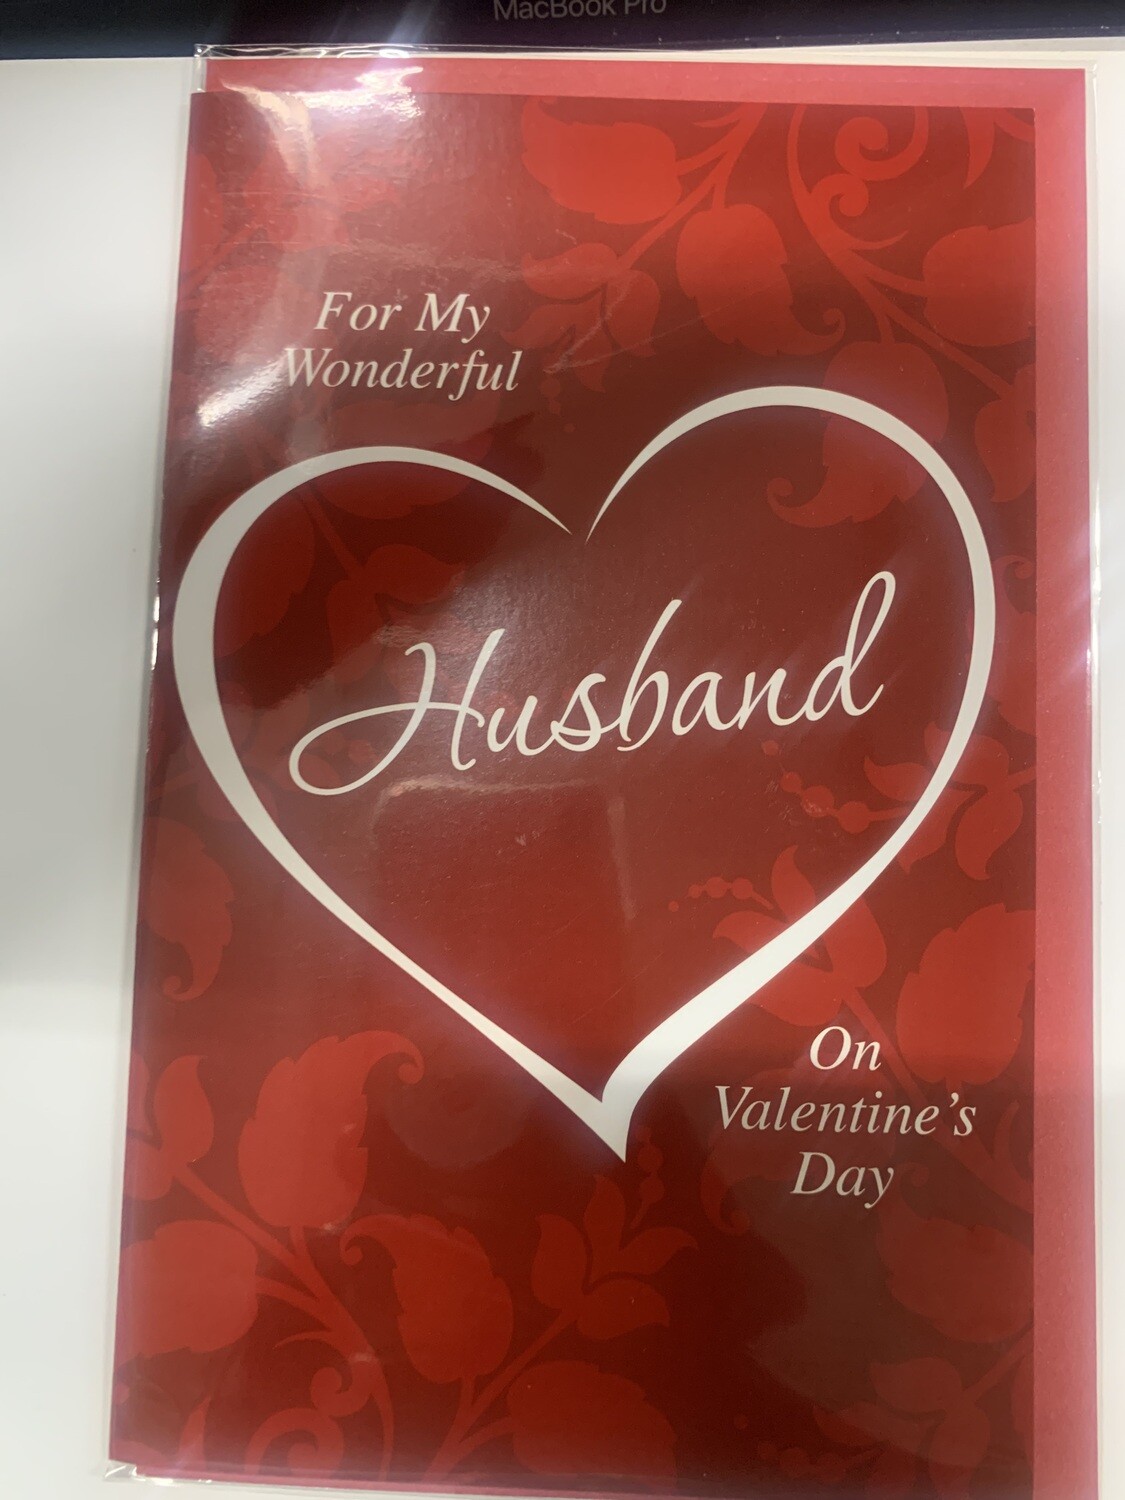 For My Wonderful Husband on Valentine's Day Card